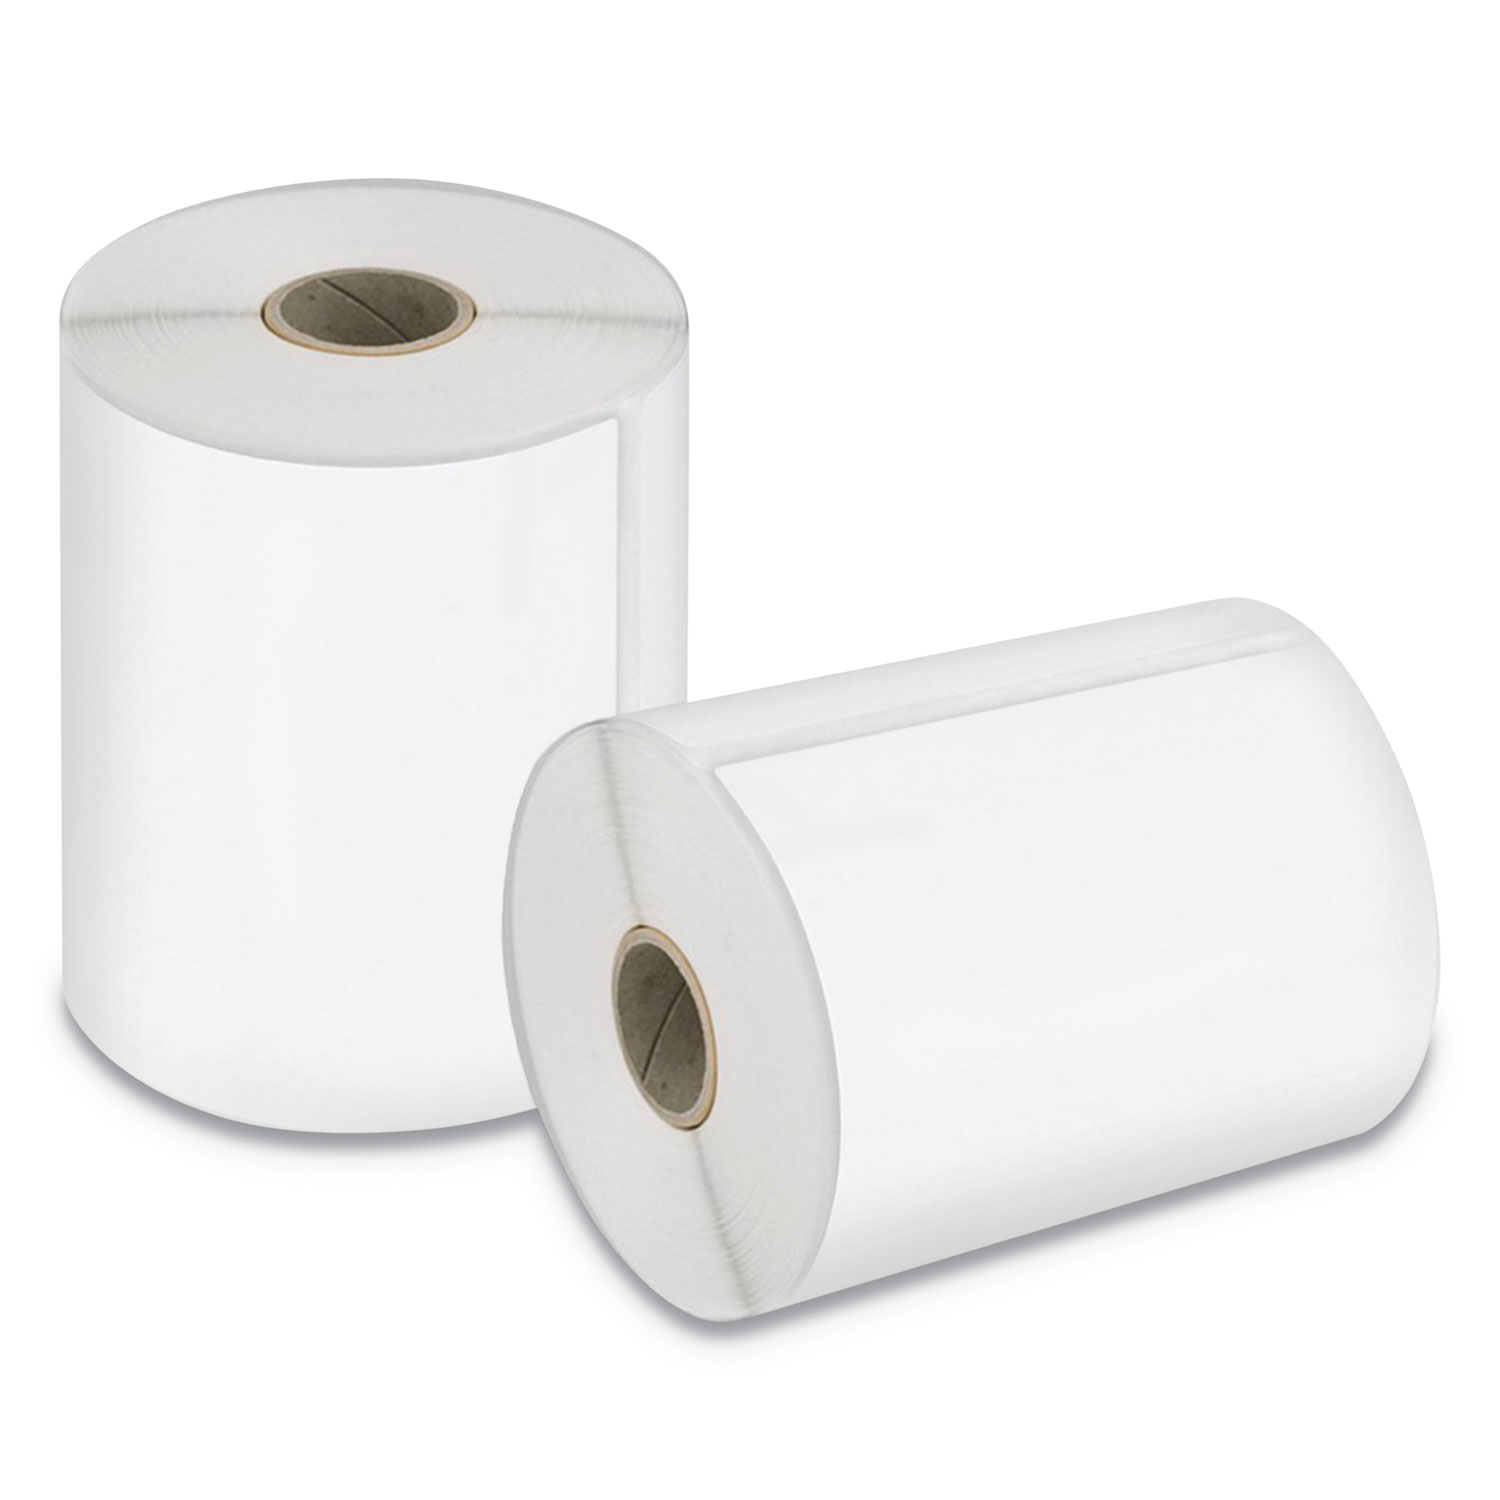  DYMO 2026405 LW Extra-Large Shipping Labels, 4 x 6, White, 220/Roll, 2 Rolls/Pack (DYM2026405) 